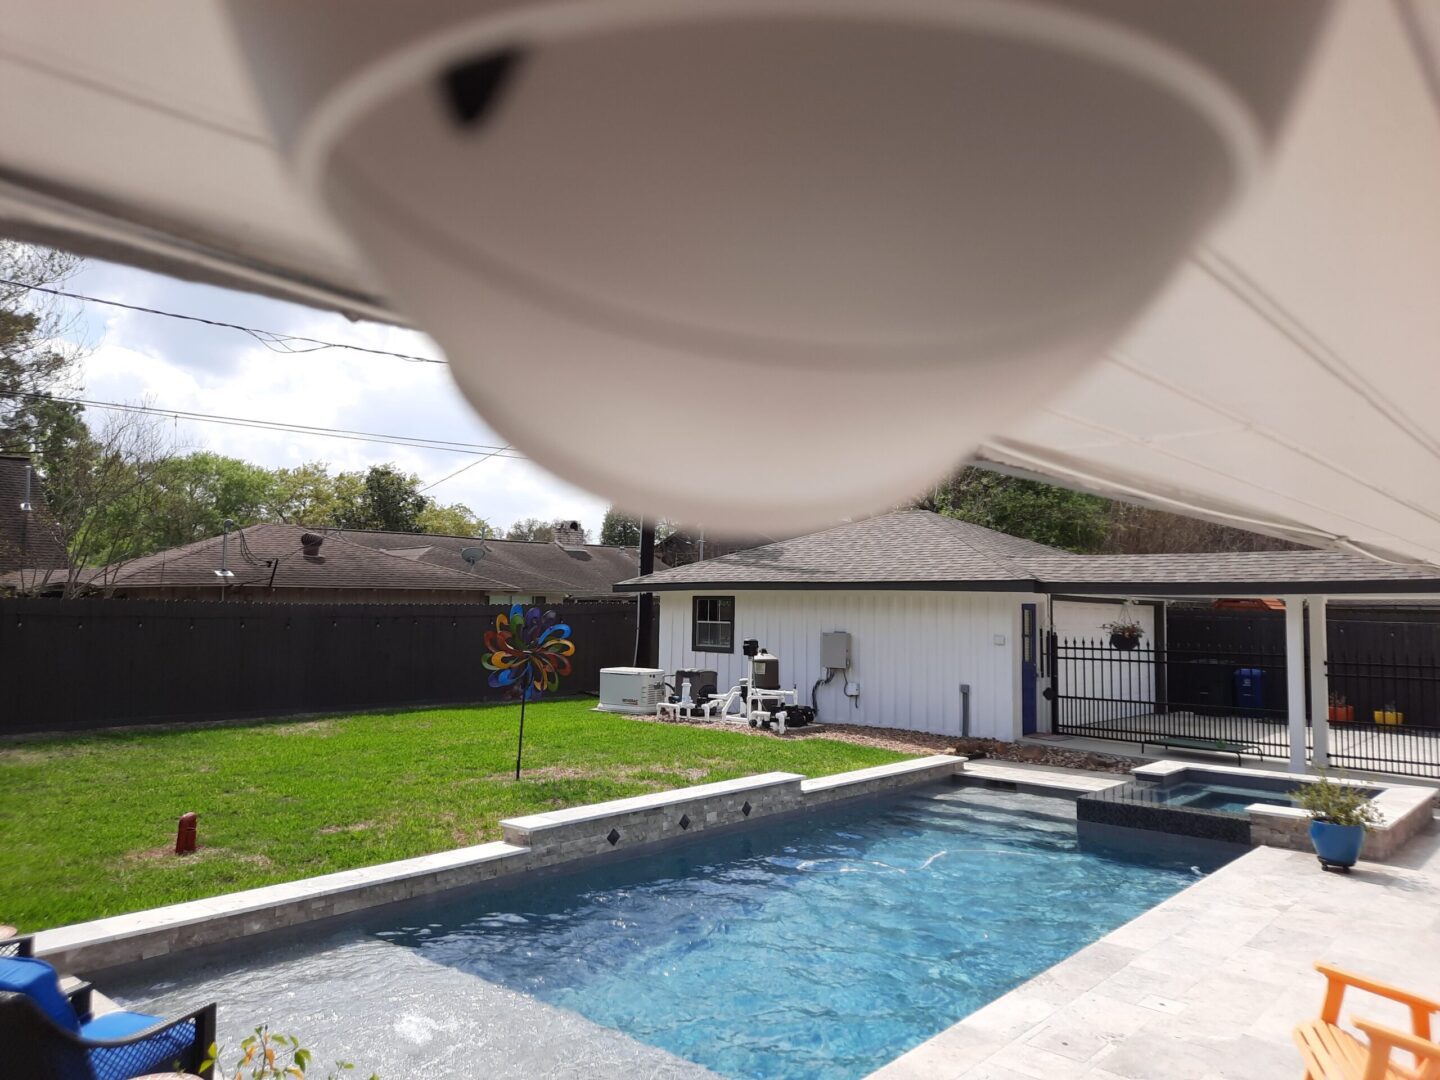 A pool with a white awning over it